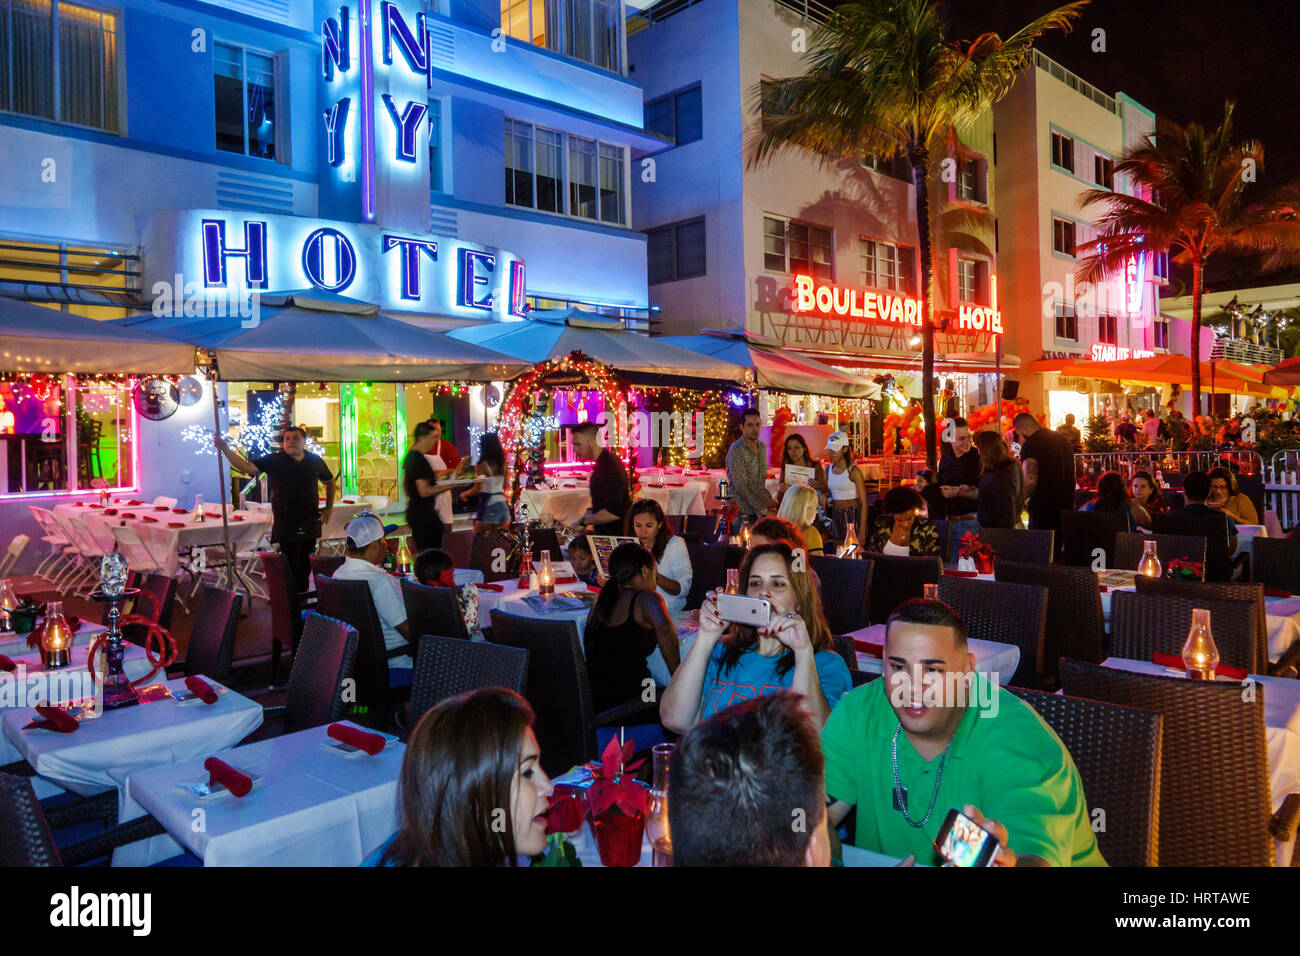 Florida South,Miami Beach,Ocean Drive,Colony Hotel,al fresco sidewalk outside outdoors tables,dining,restaurant restaurants food dining eating out caf Stock Photo